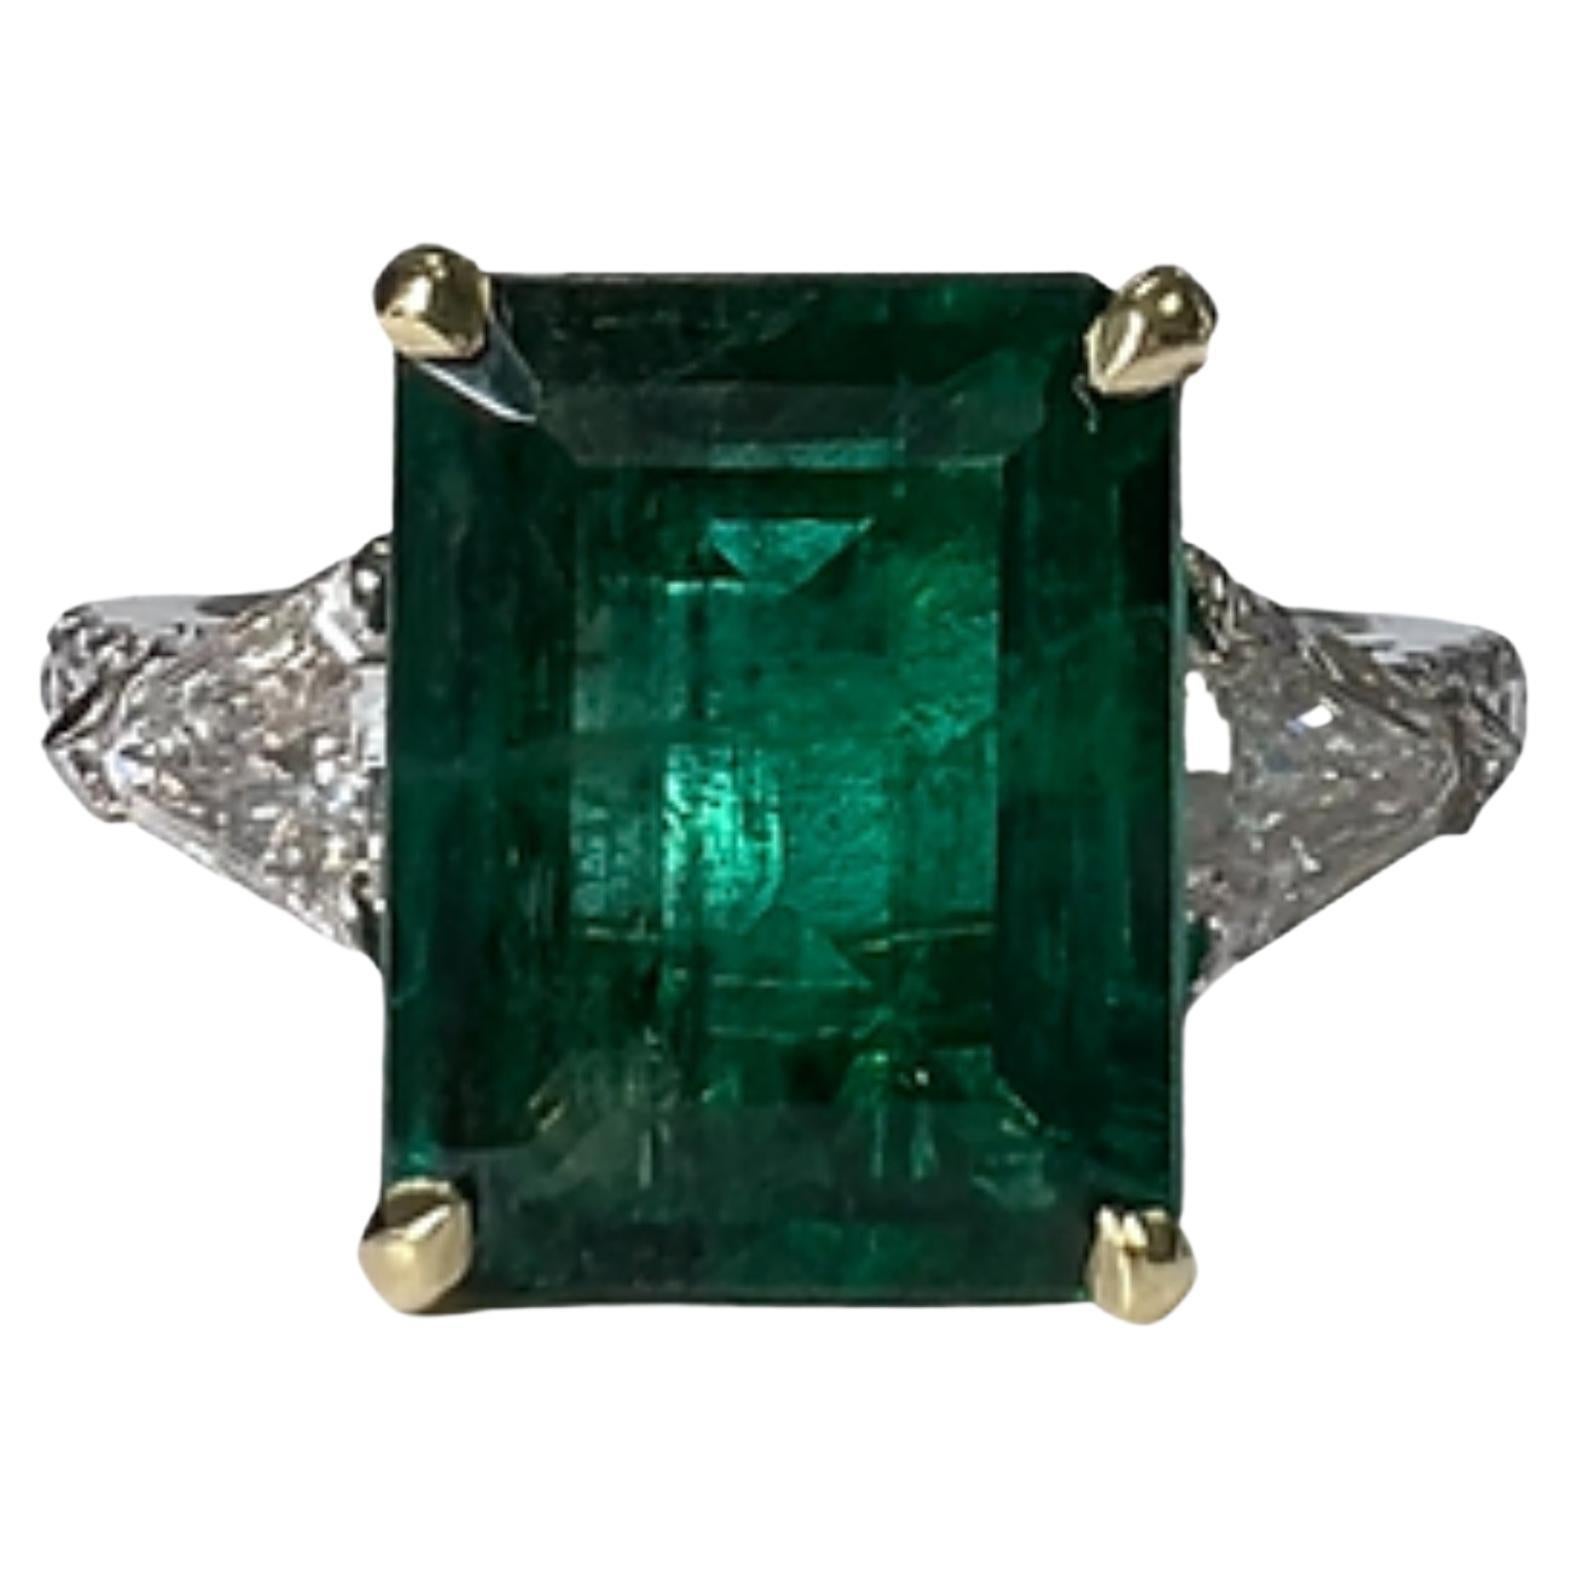 For Sale:  5 Carat Natural Emerald Diamond Engagement Ring Set in 18K Gold, Cocktail Ring